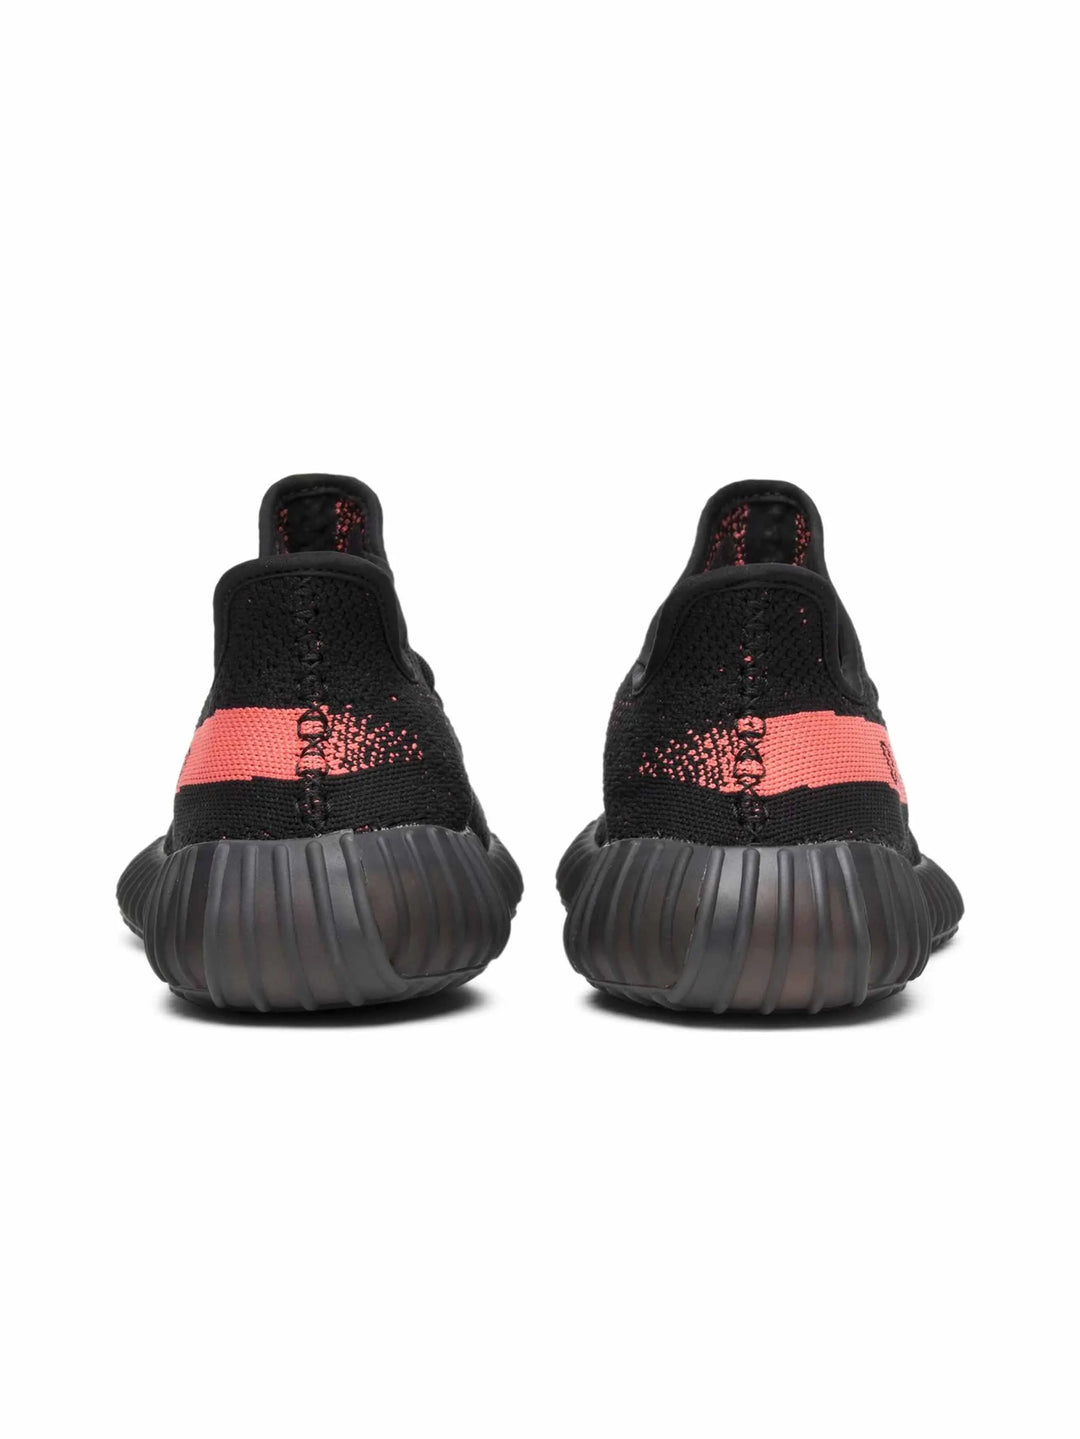 adidas Yeezy Boost 350 V2 Core Black Red (2016/2022/2023) - Prior